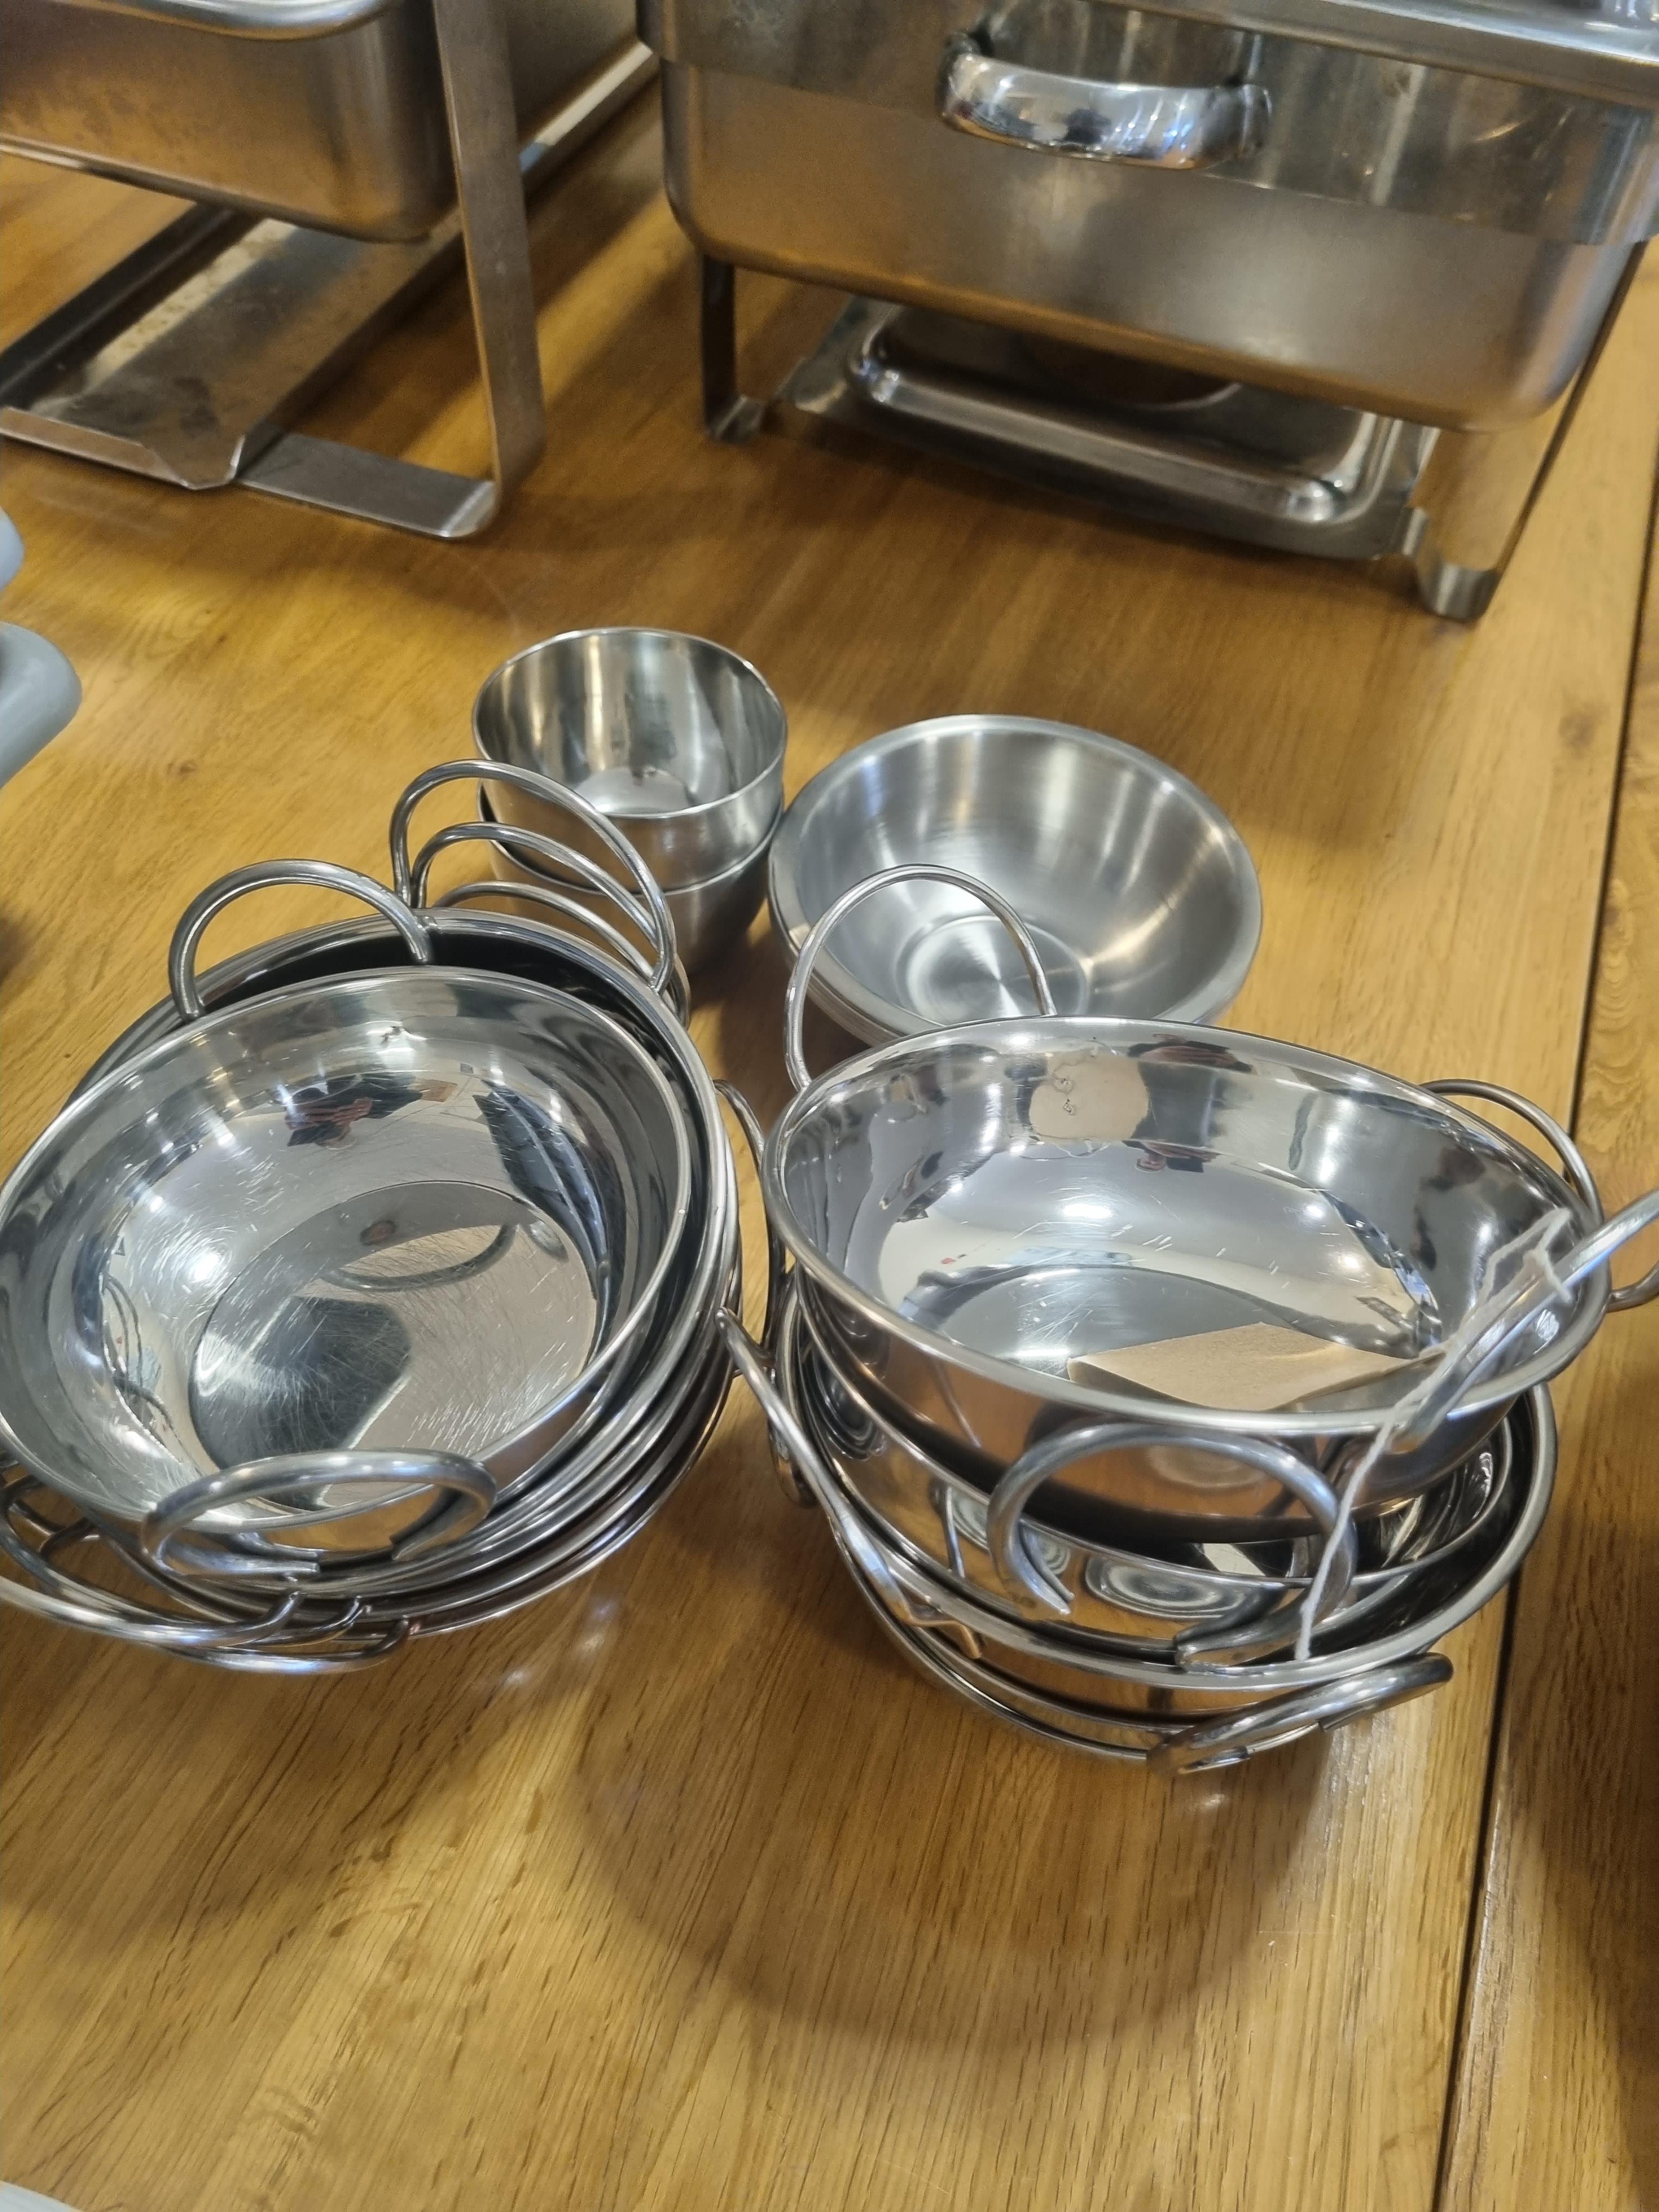 10 x Stainless Steel Curry Bowls and 8 X Stainless Steel Side Dishes In Various Sizes